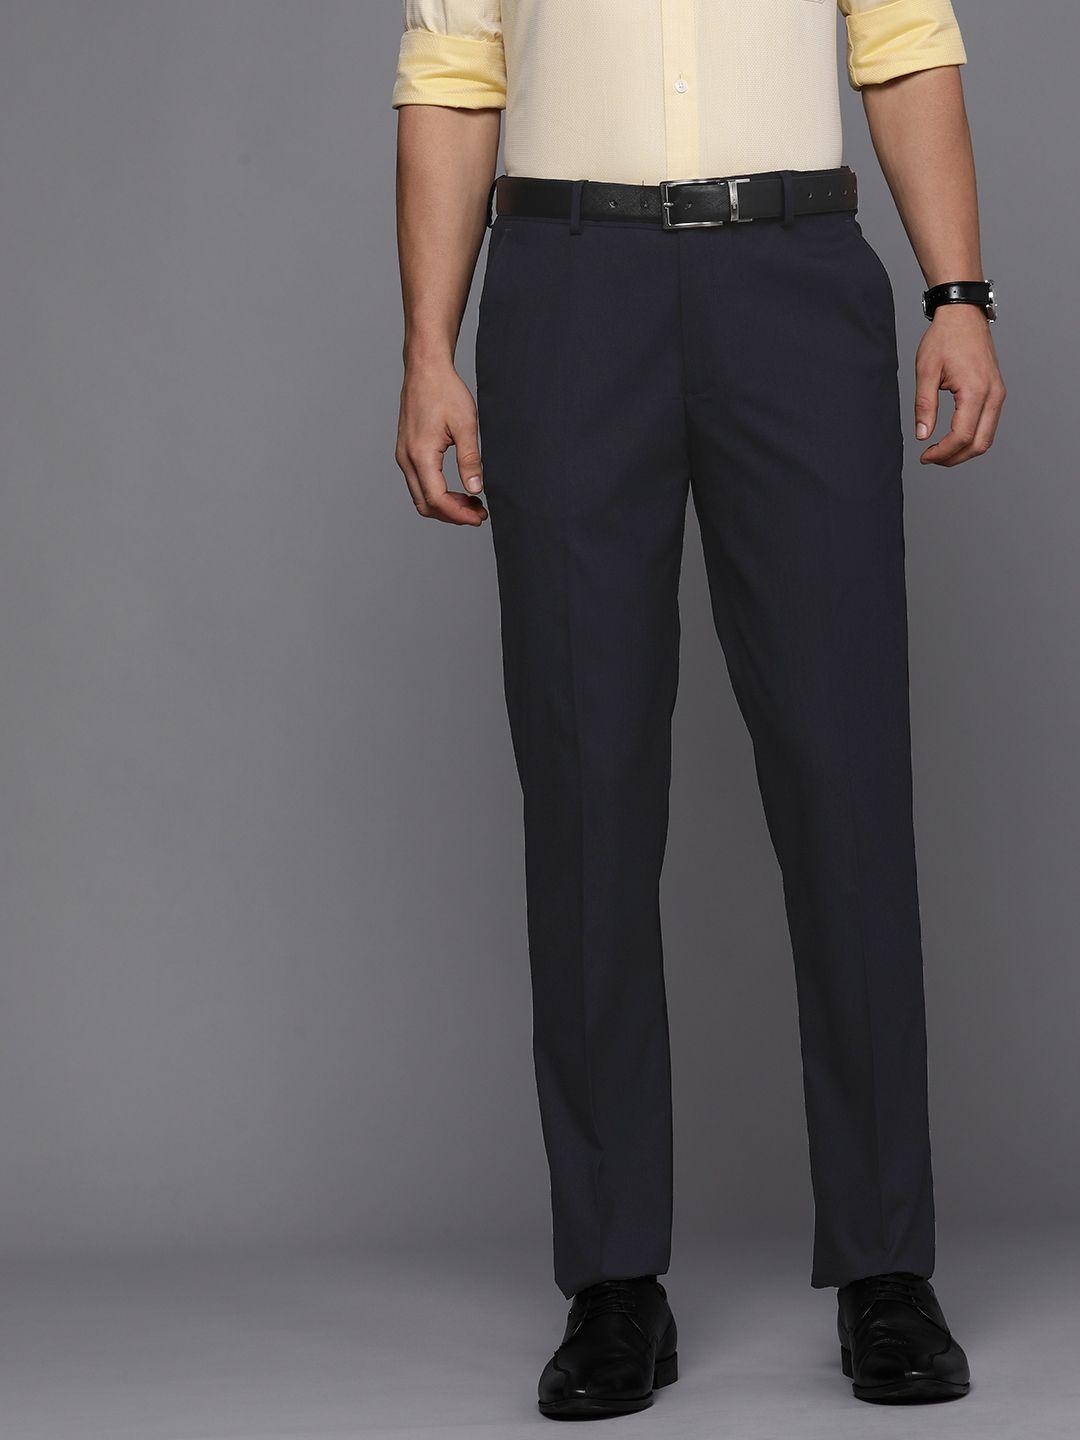 louis-philippe-men-navy-blue-solid-slim-fit-formal-trousers